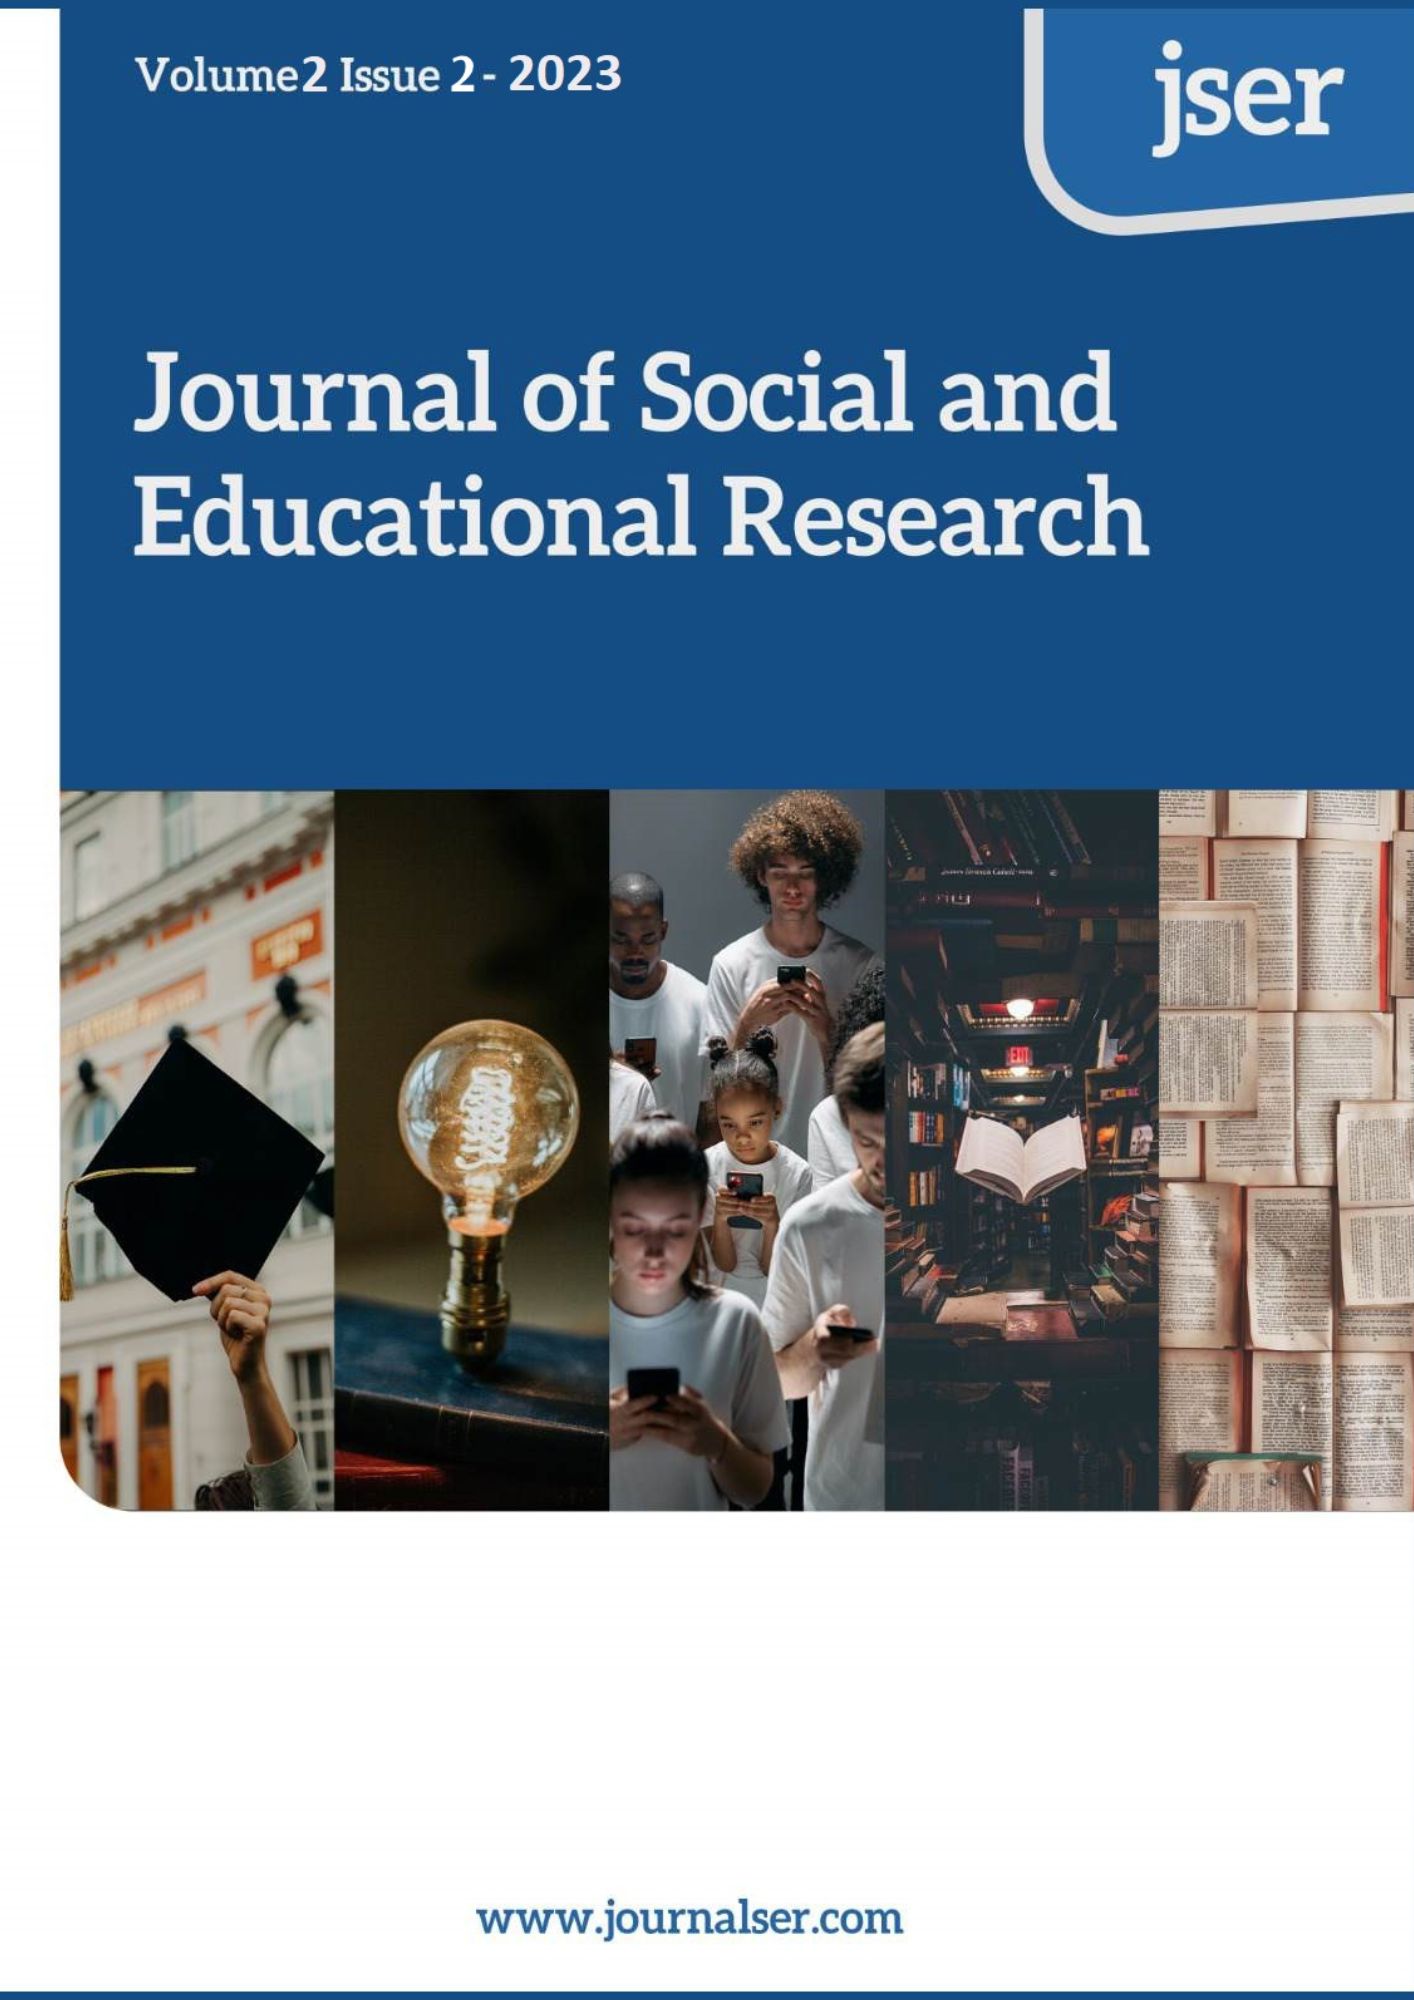 Azerbaijani validation of the High-School Satisfaction Scale: Investigating within the context of education and psychological environment